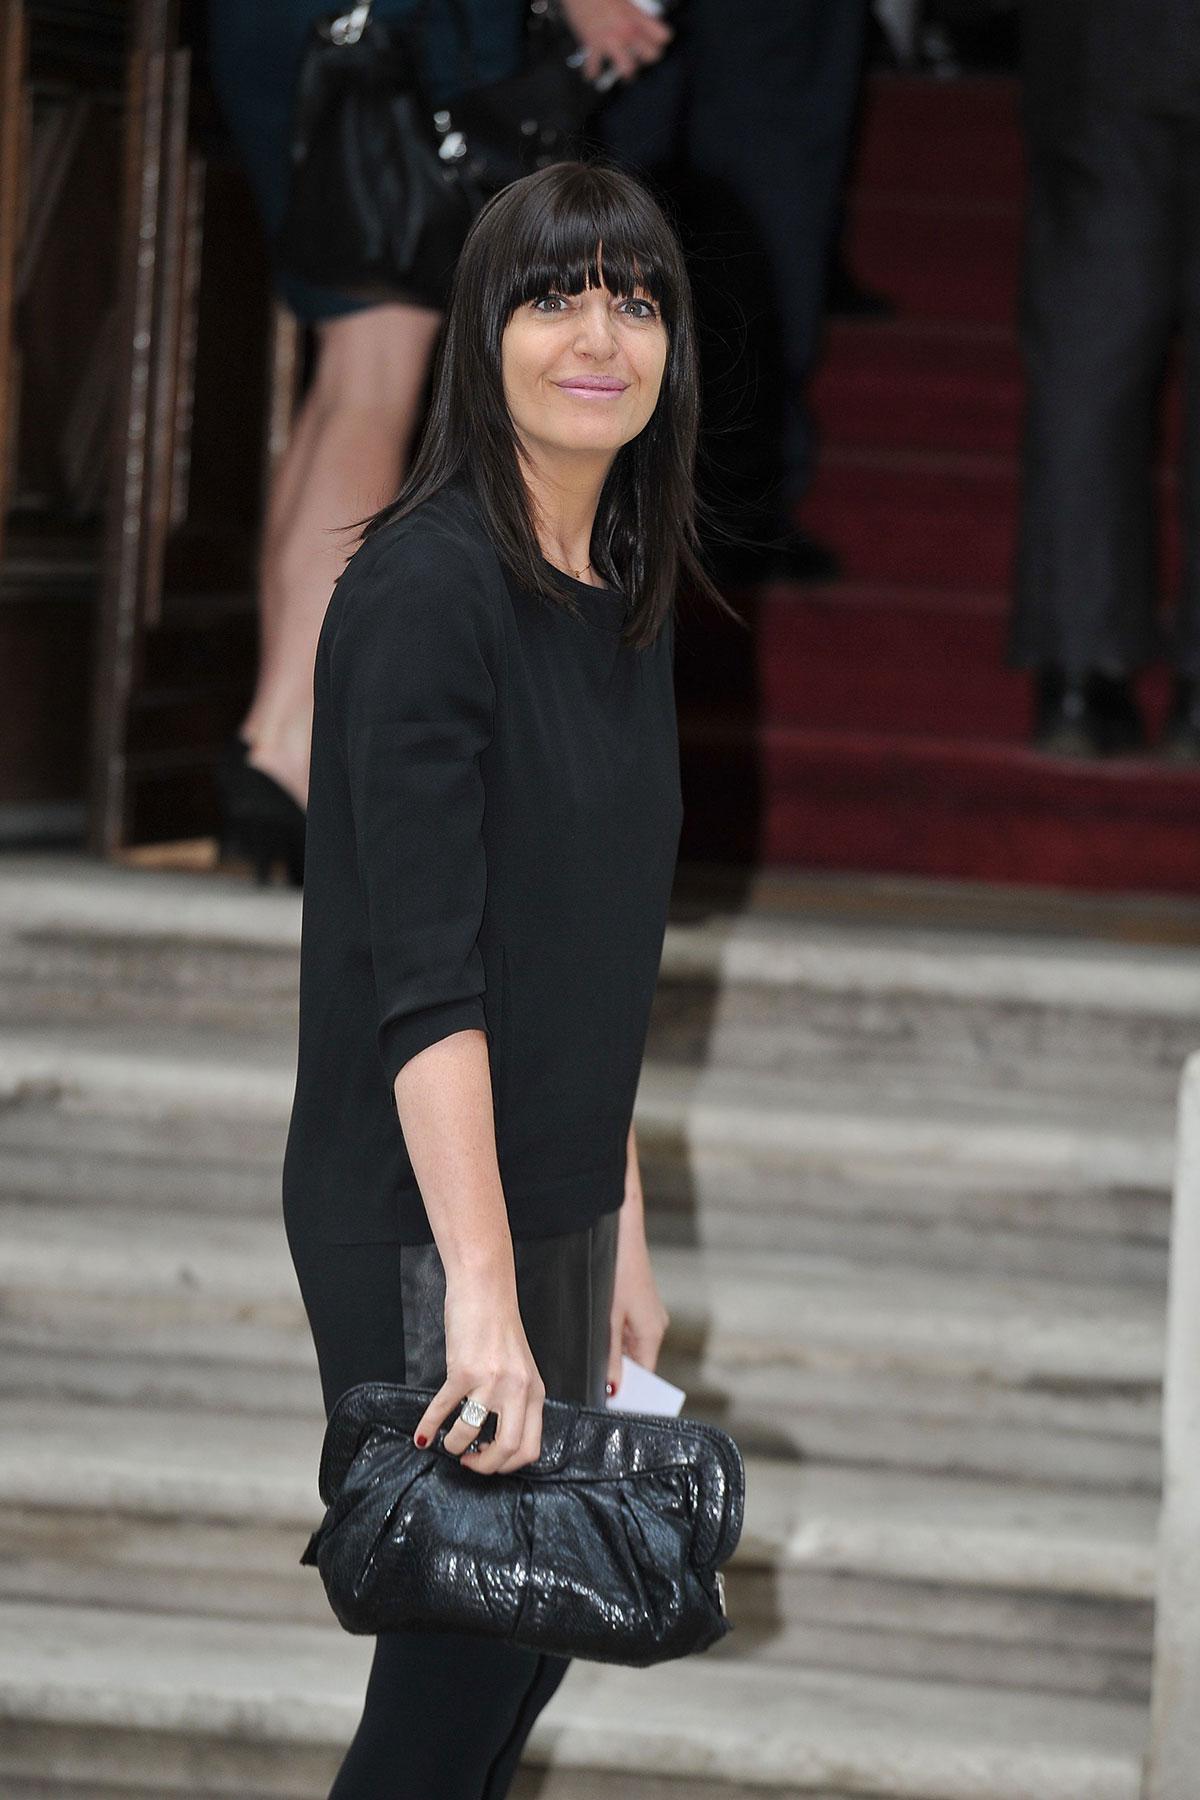 Claudia Winkleman attends Best of Britain’s Creative Industries reception